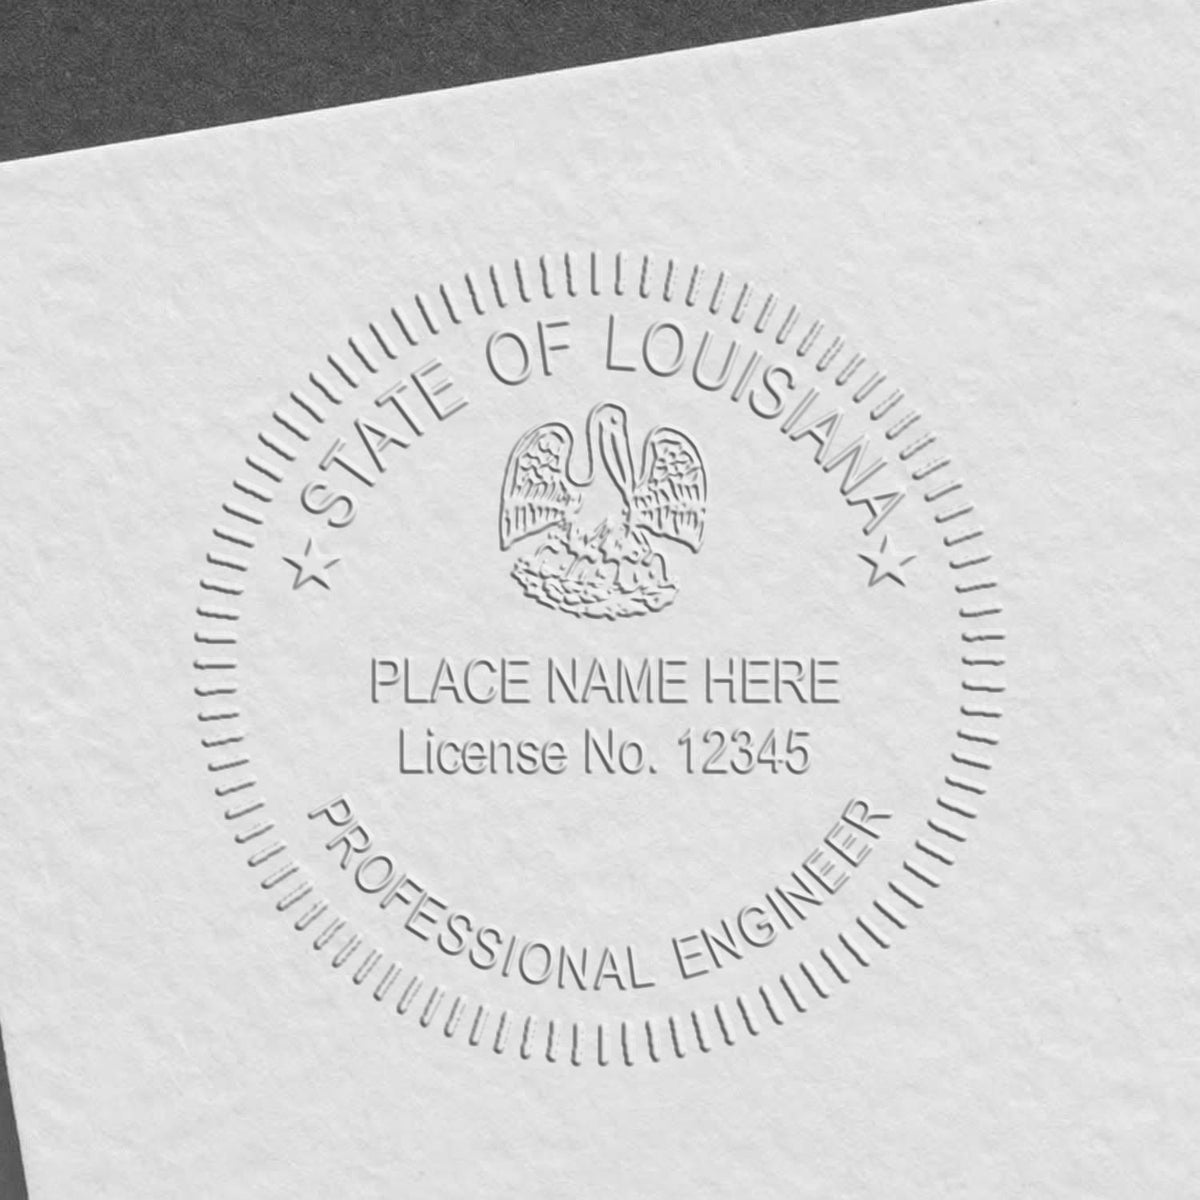 A stamped impression of the Louisiana Engineer Desk Seal in this stylish lifestyle photo, setting the tone for a unique and personalized product.